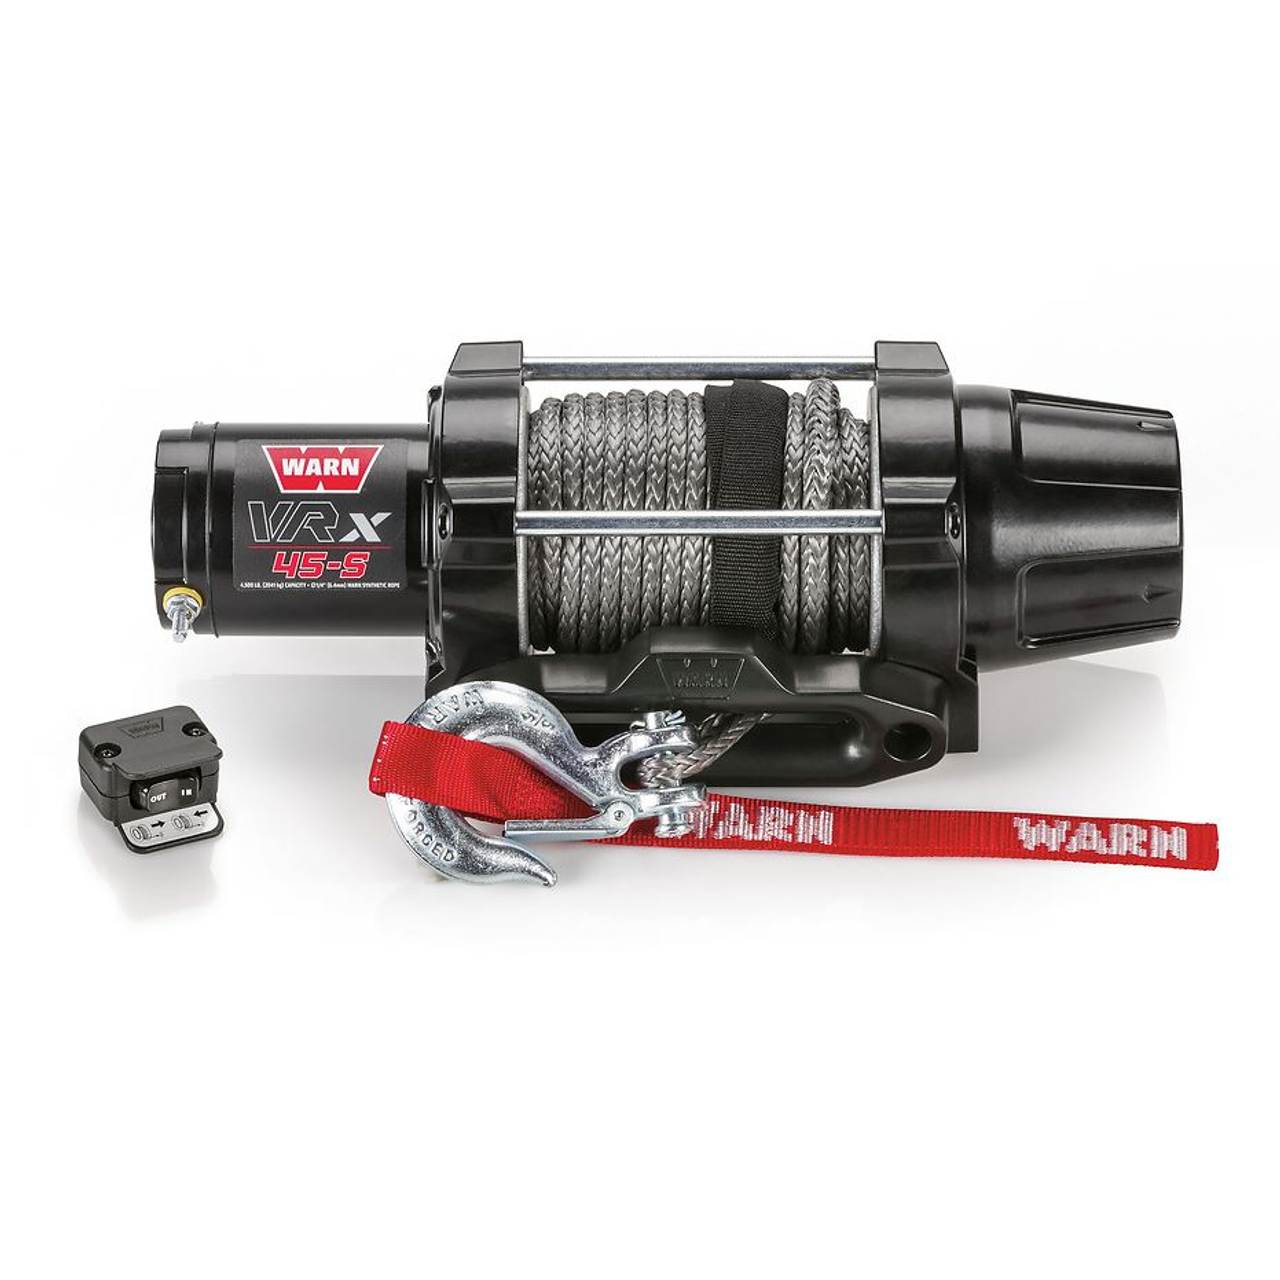 Warn industries vrx 4500 winch w/synthetic rope - Summit 4x4 Company